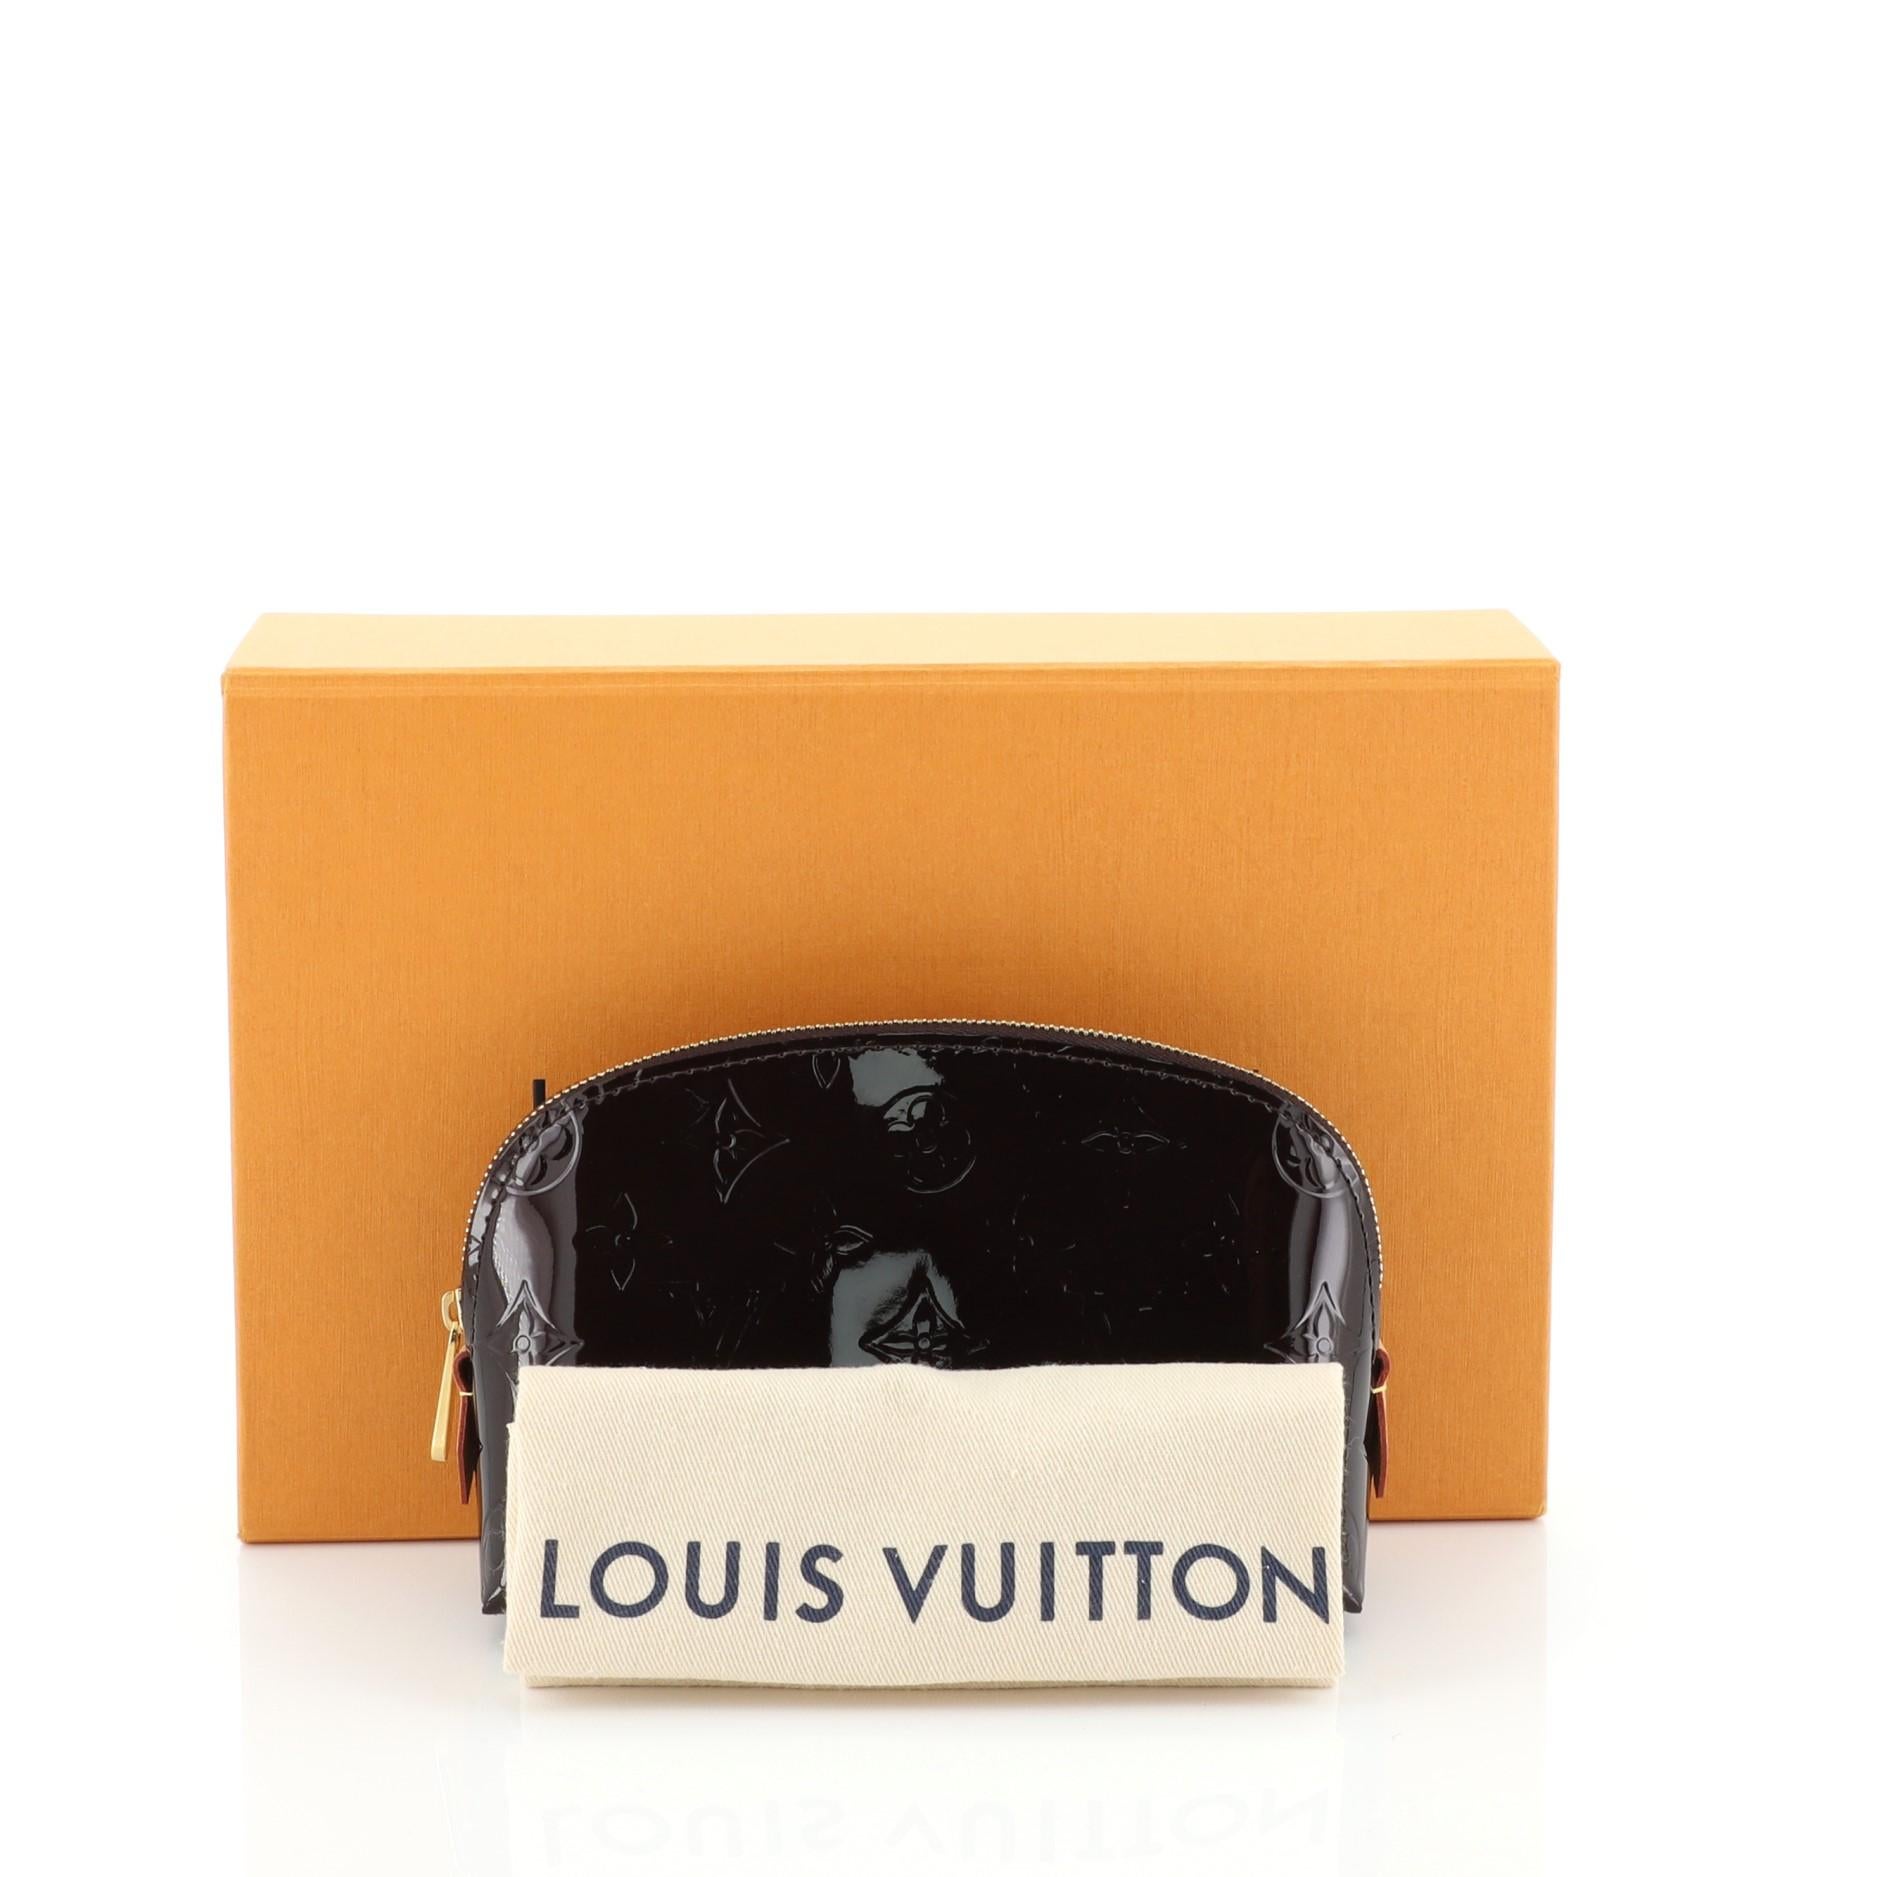 This Louis Vuitton Cosmetic Pouch Monogram Vernis, crafted in red monogram vernis, features gold-tone hardware. Its zip closure opens to a red leather interior with slip pocket. Authenticity code reads: SR0199. 

Estimated Retail Price: